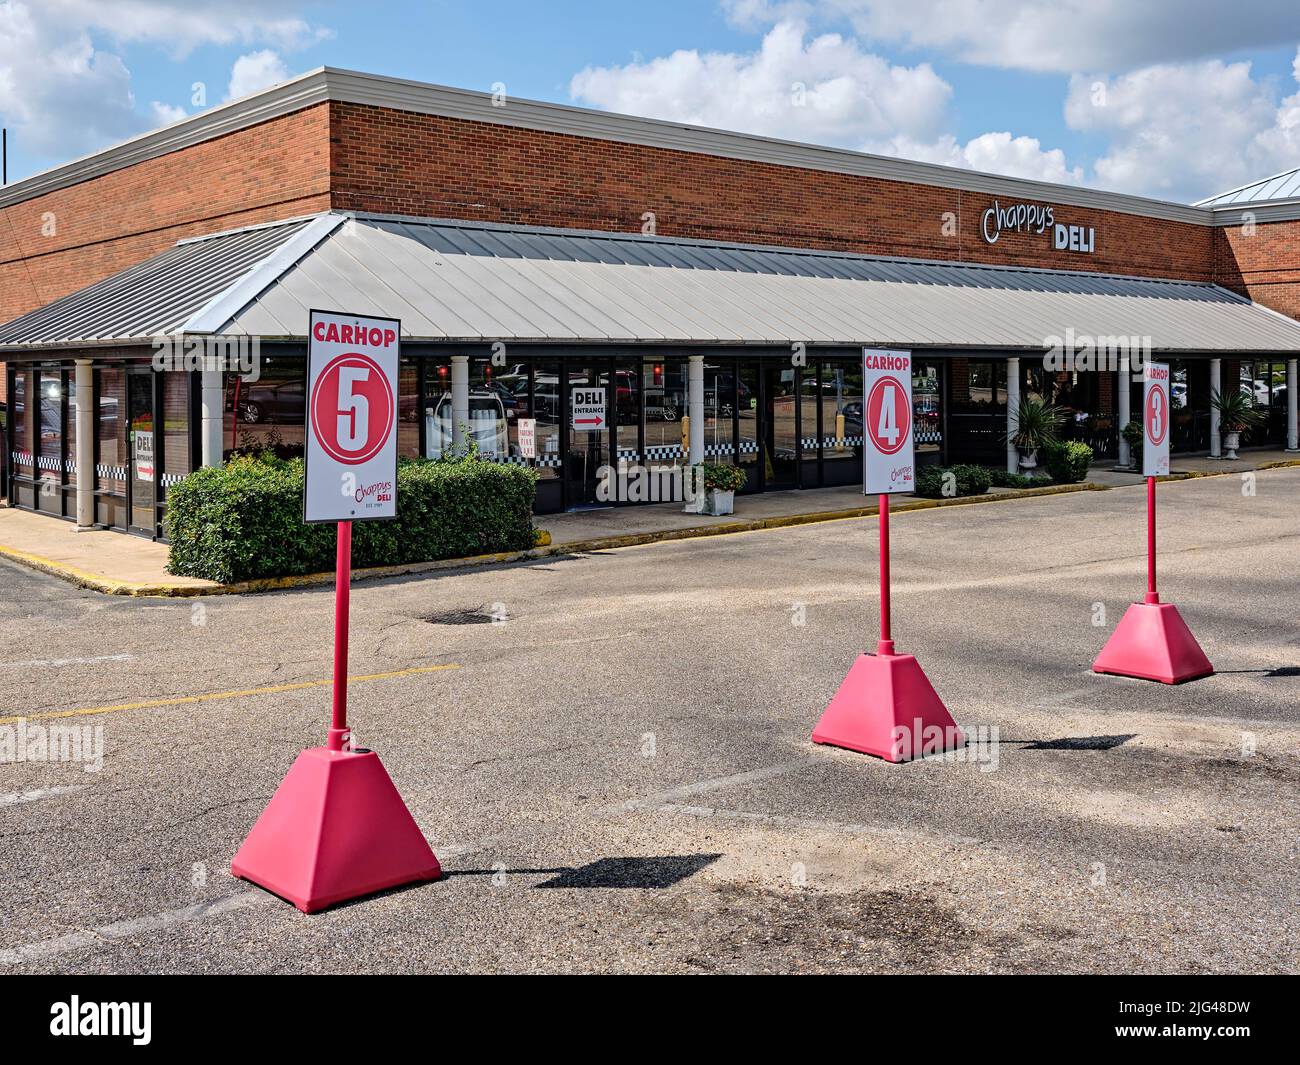 Restaurant drive up take out parking called carhop or car hop at Chappy's Deli in Montgomery Alabama, USA. Stock Photo